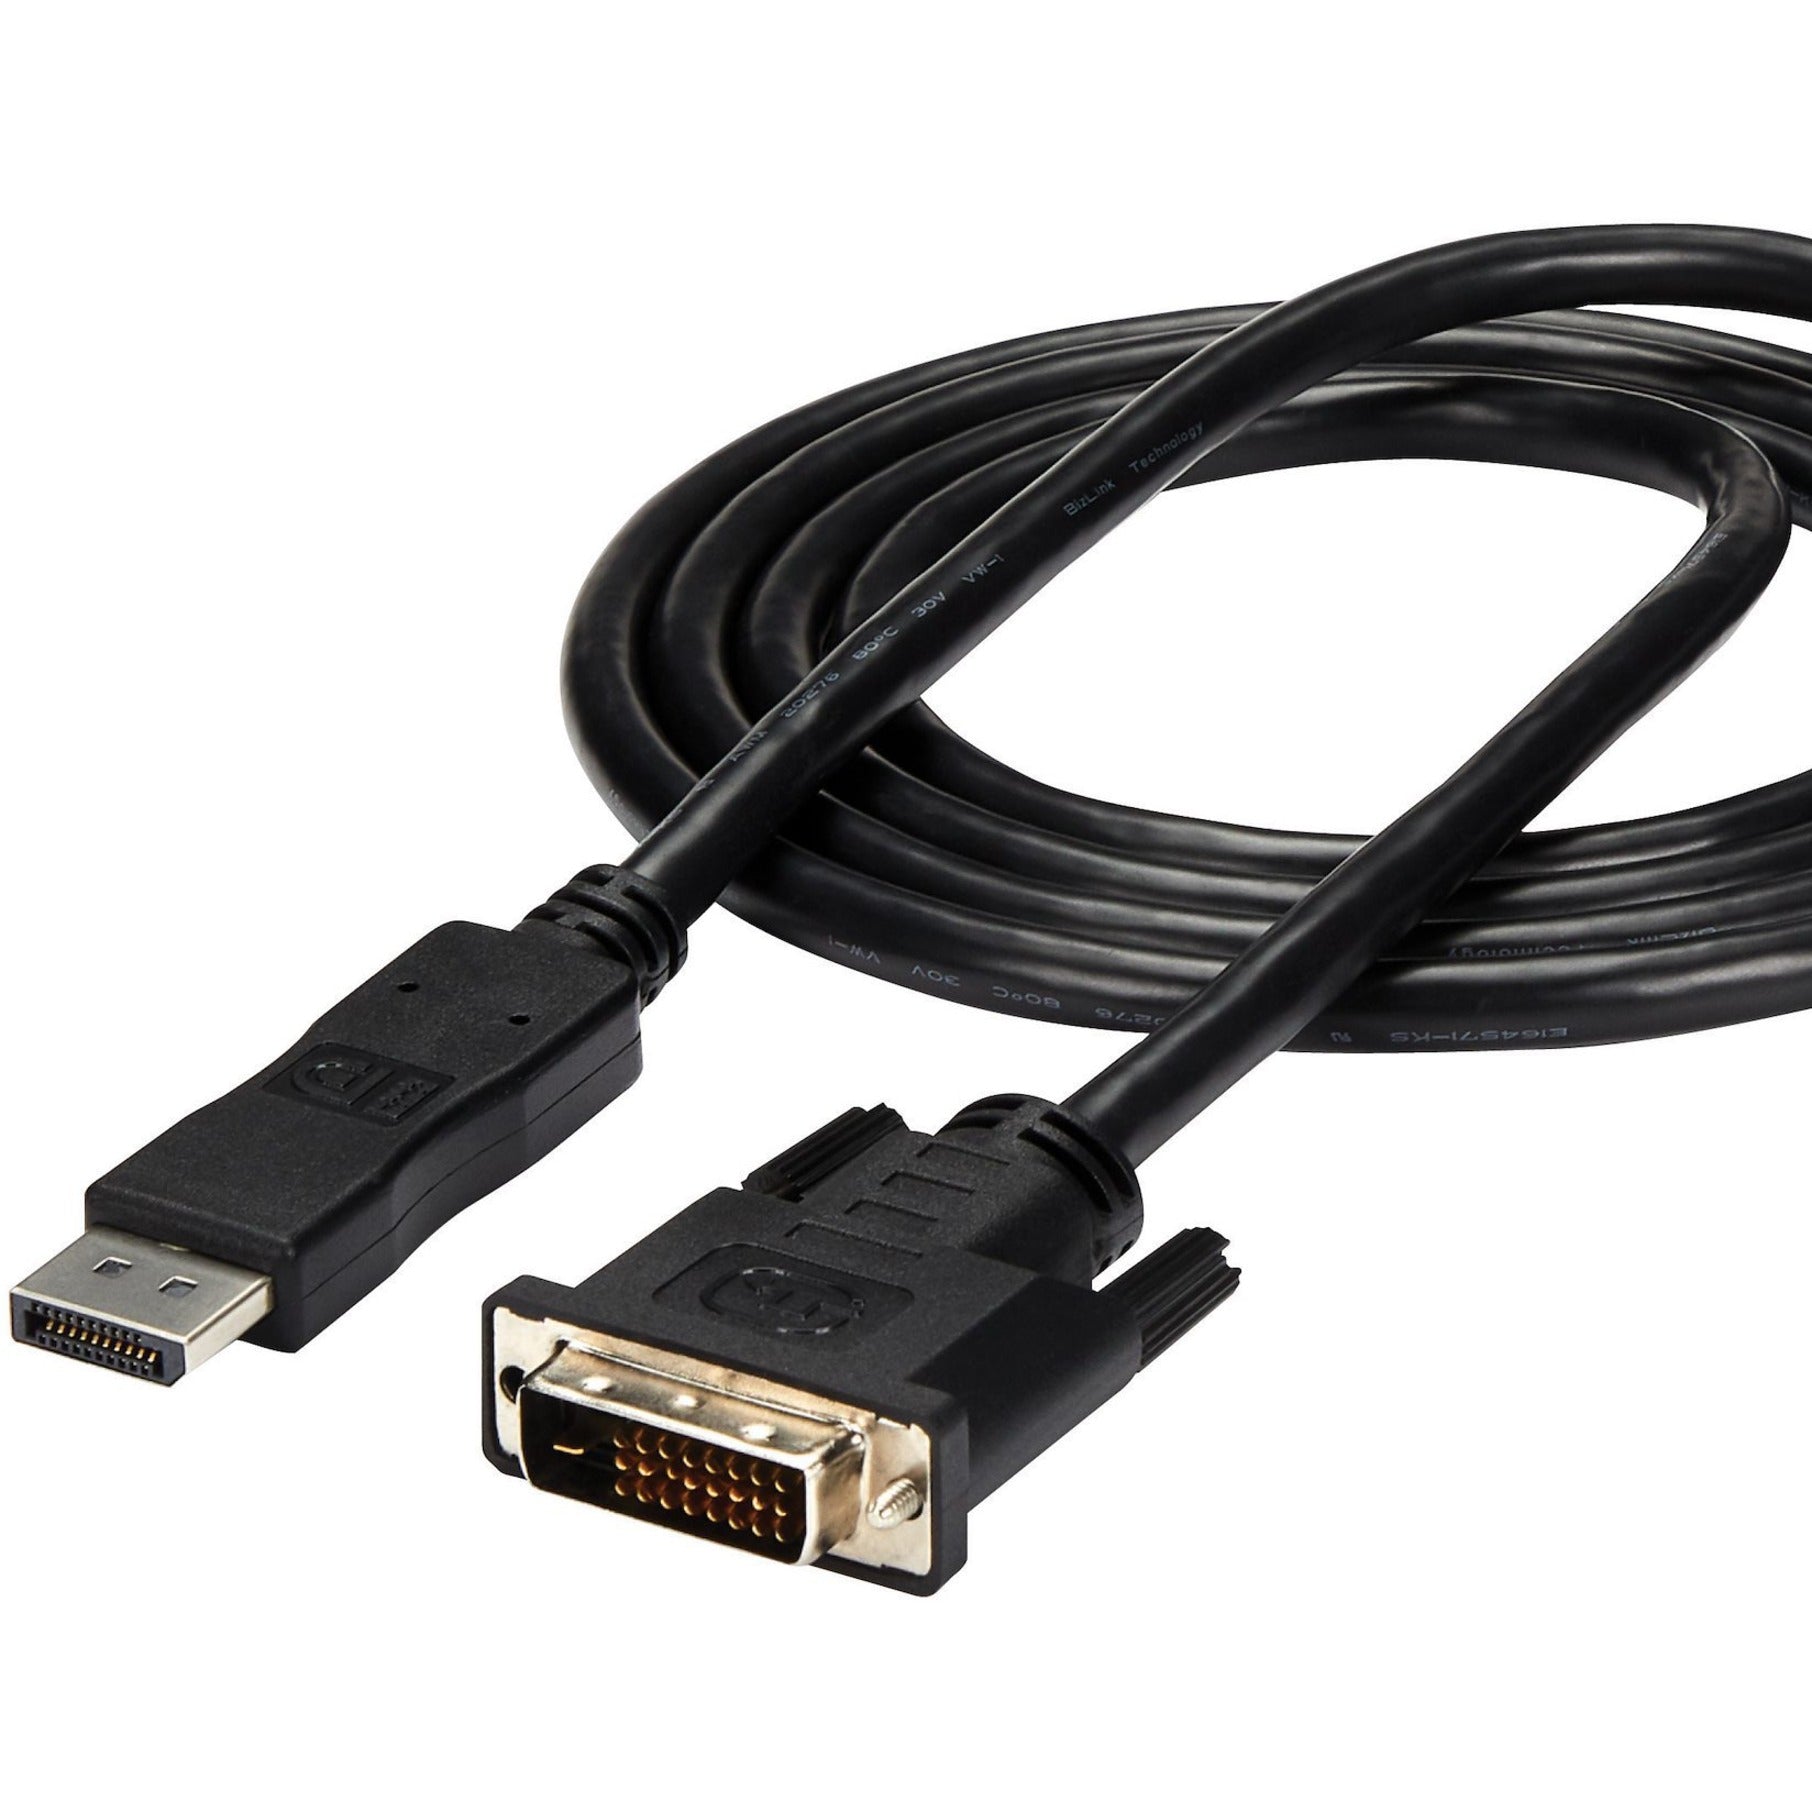 StarTech.com DP2DVIMM6 DisplayPort to DVI Cable, 6 ft, Plug & Play, 1920 x 1200 Supported Resolution, Black